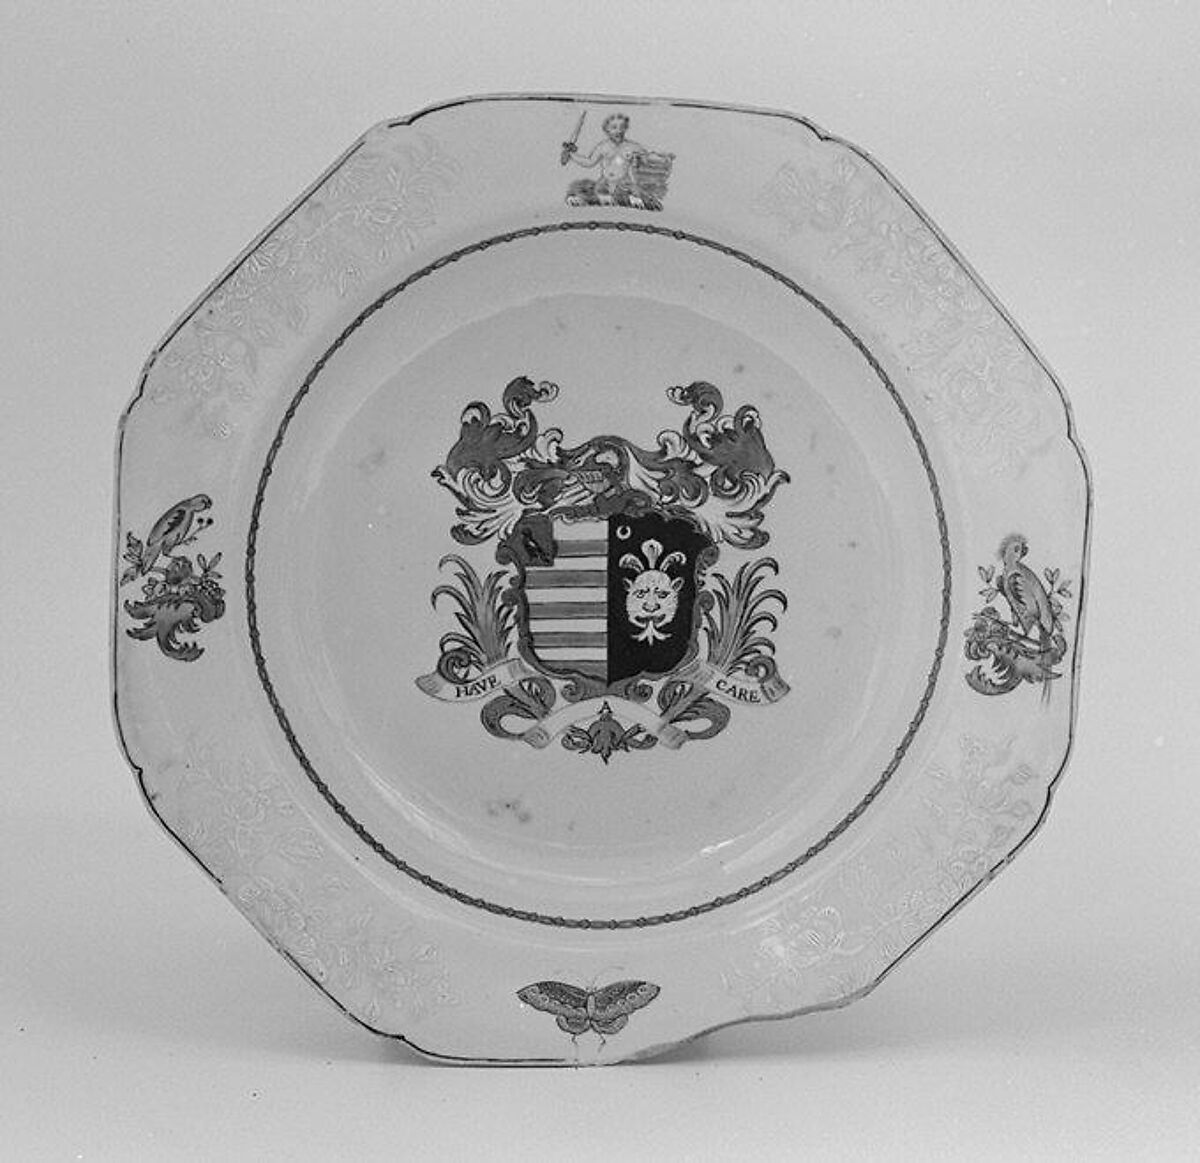 Soup plate, Hard-paste porcelain, Chinese, for British market 